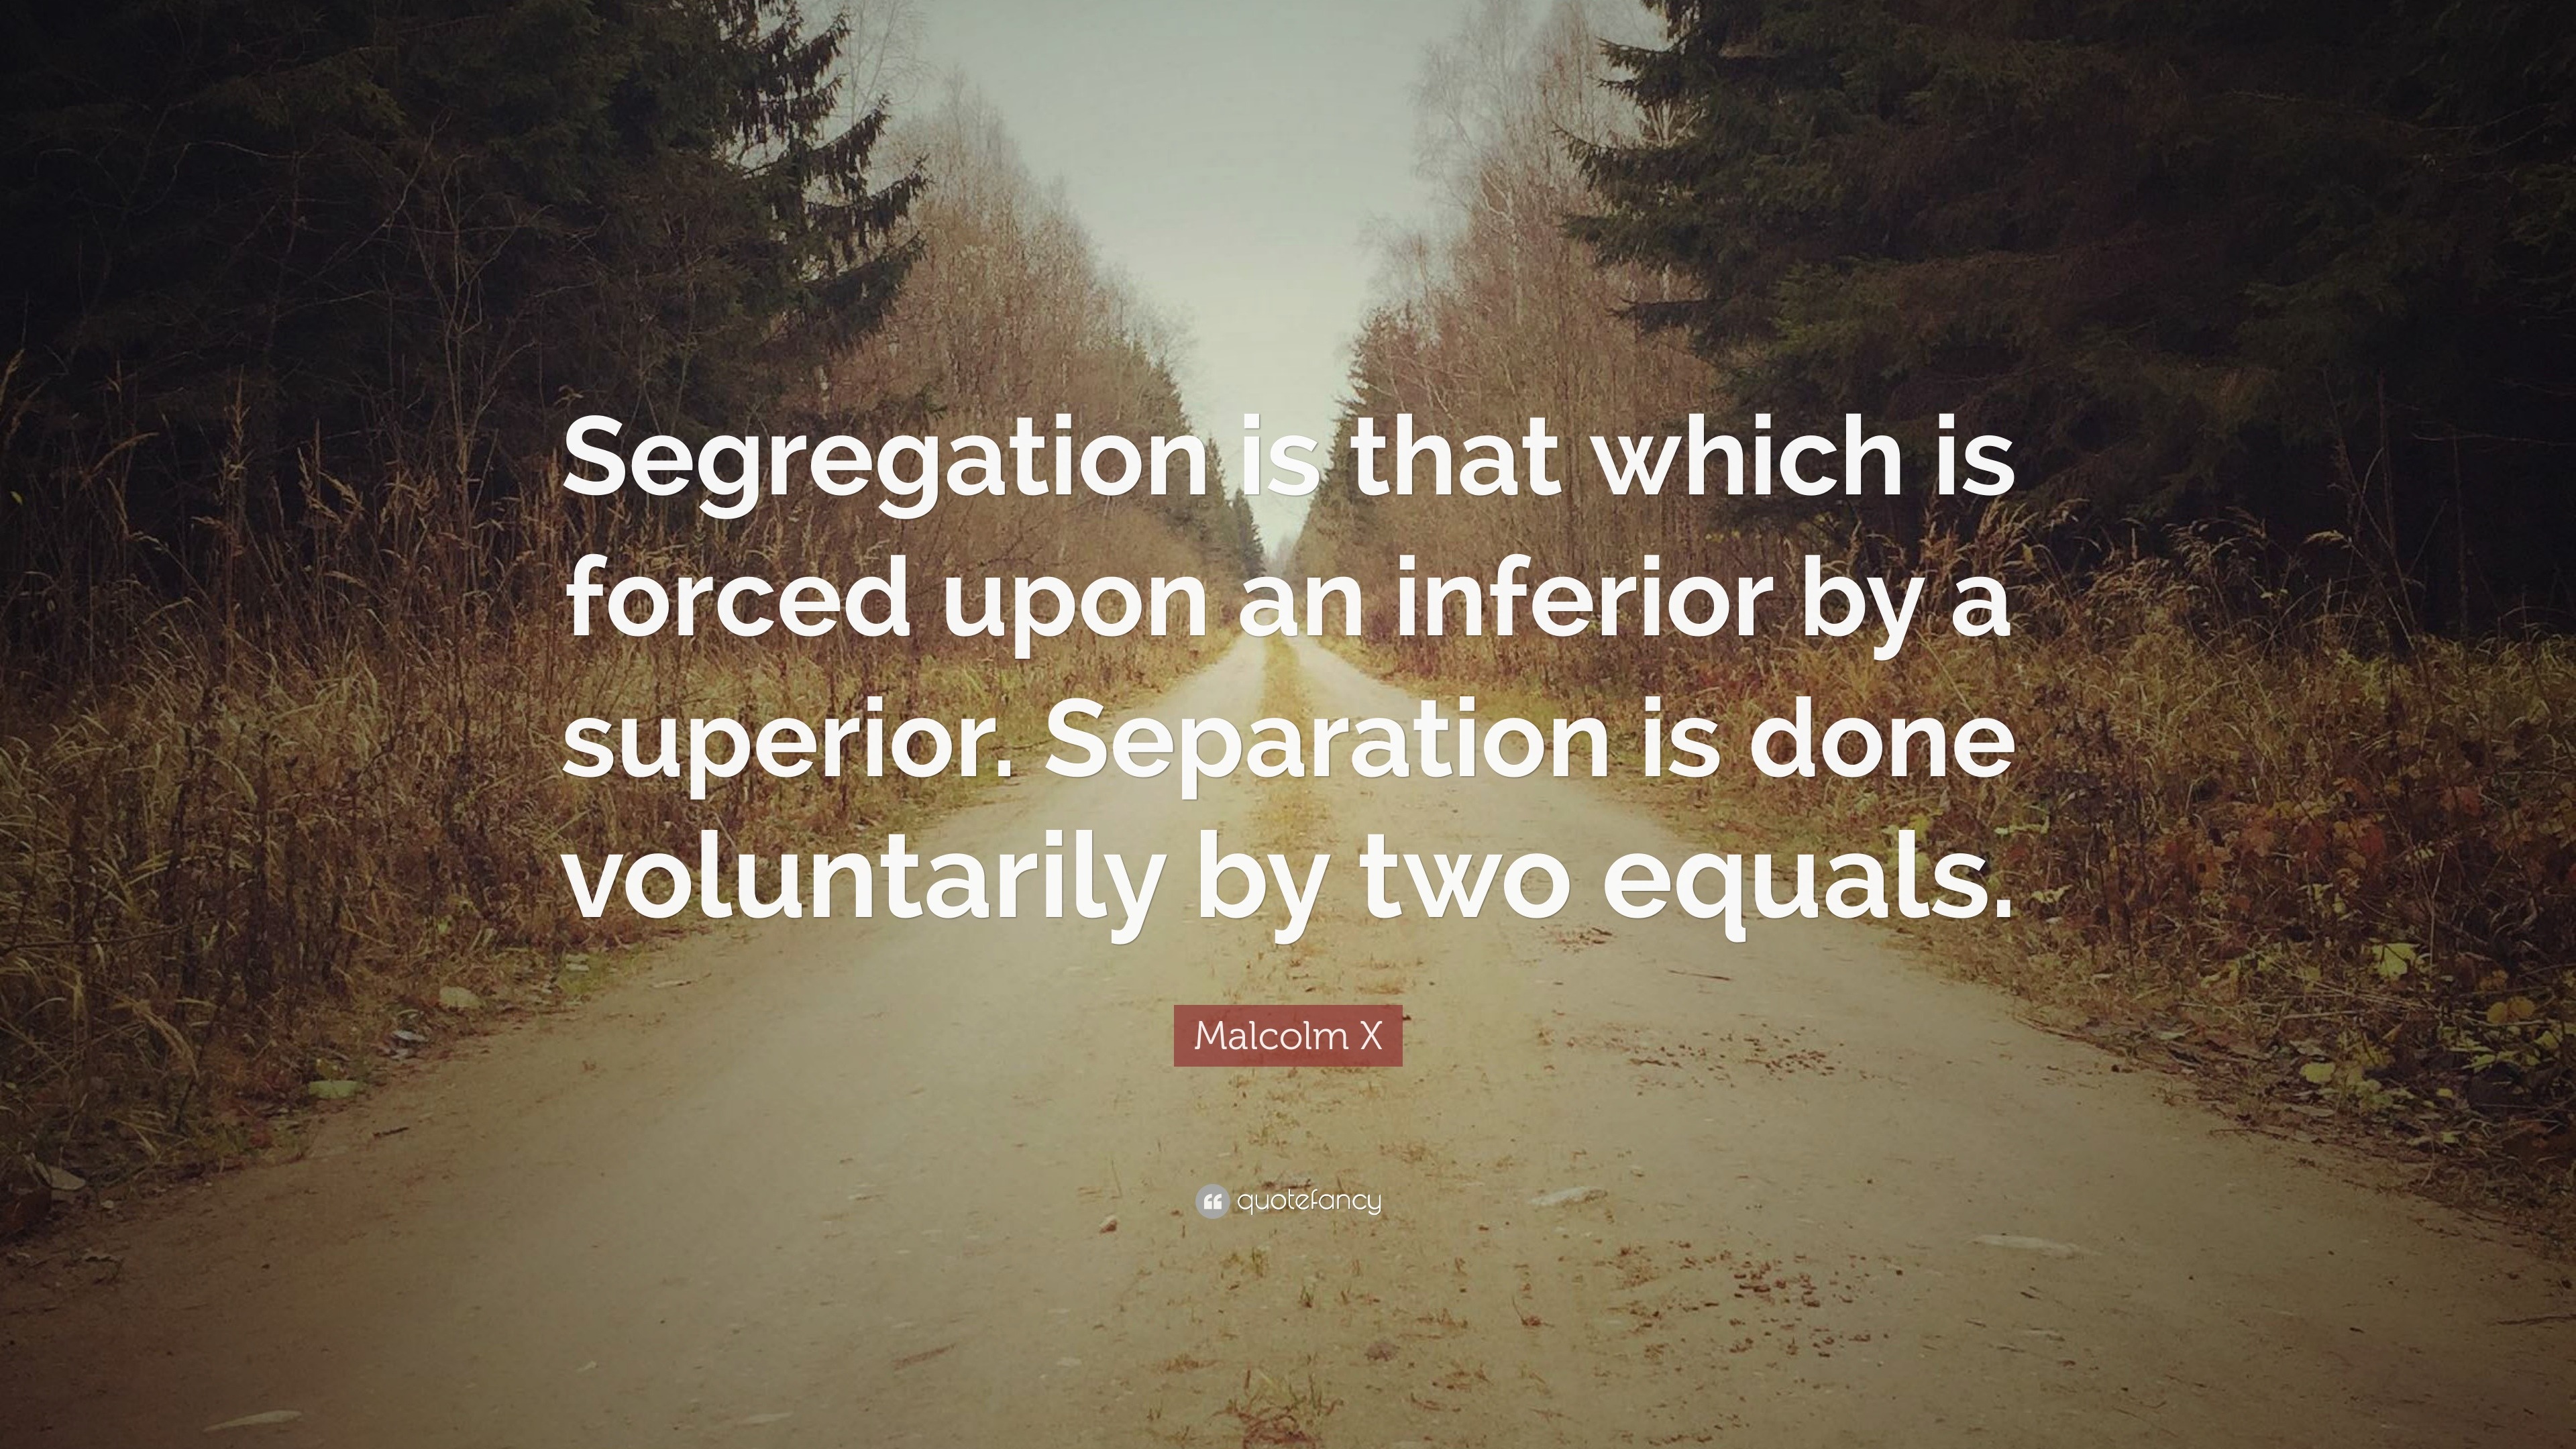 Malcolm X Quote: “Segregation is that which is forced upon an inferior